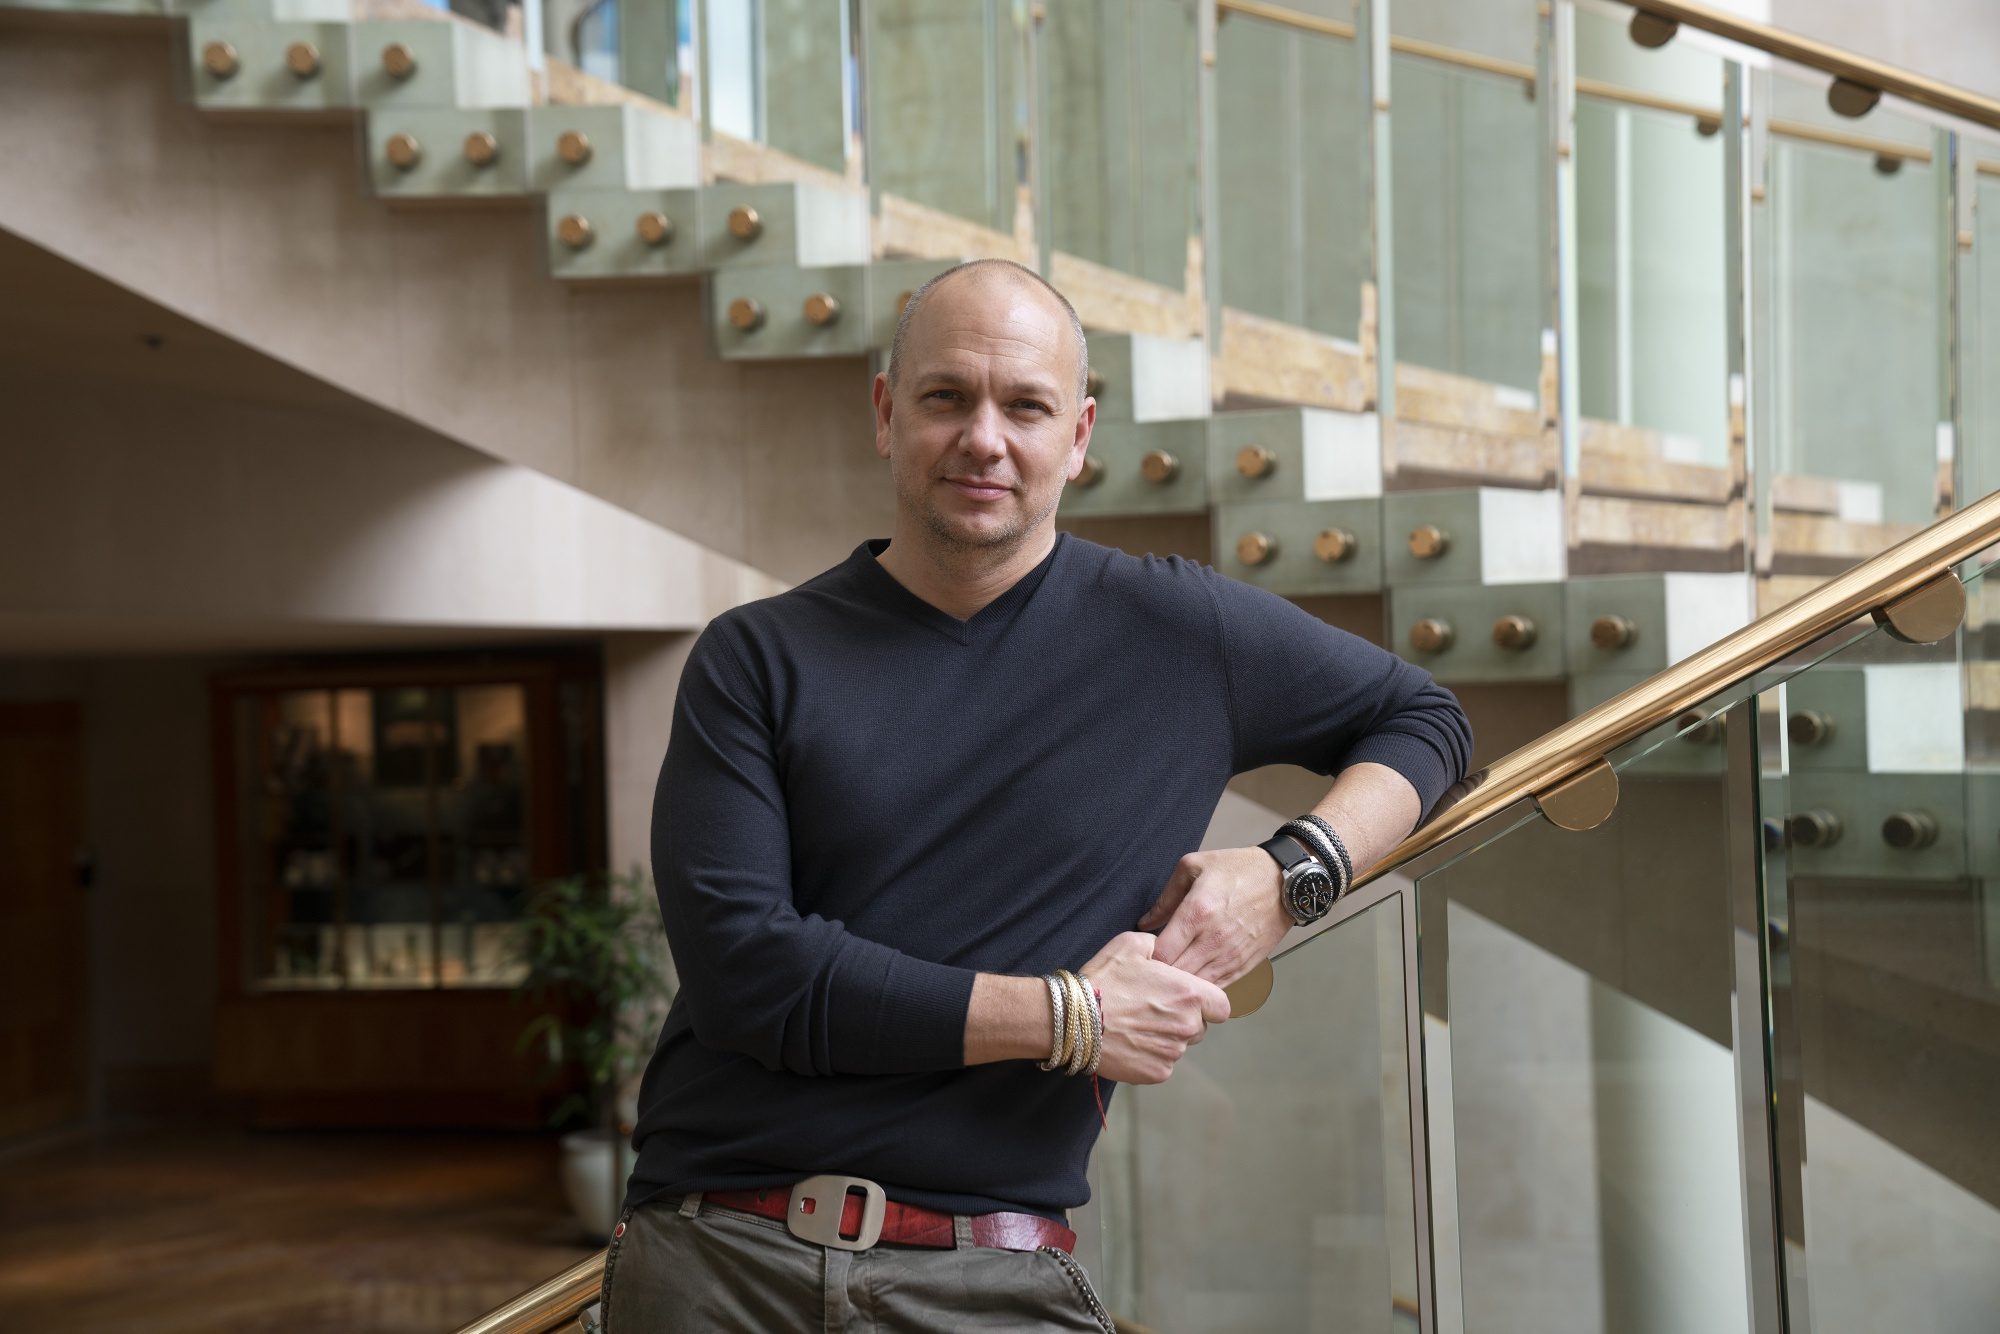 iPhone co-creator & Future Shape founder Fadell avoids direct investments in China